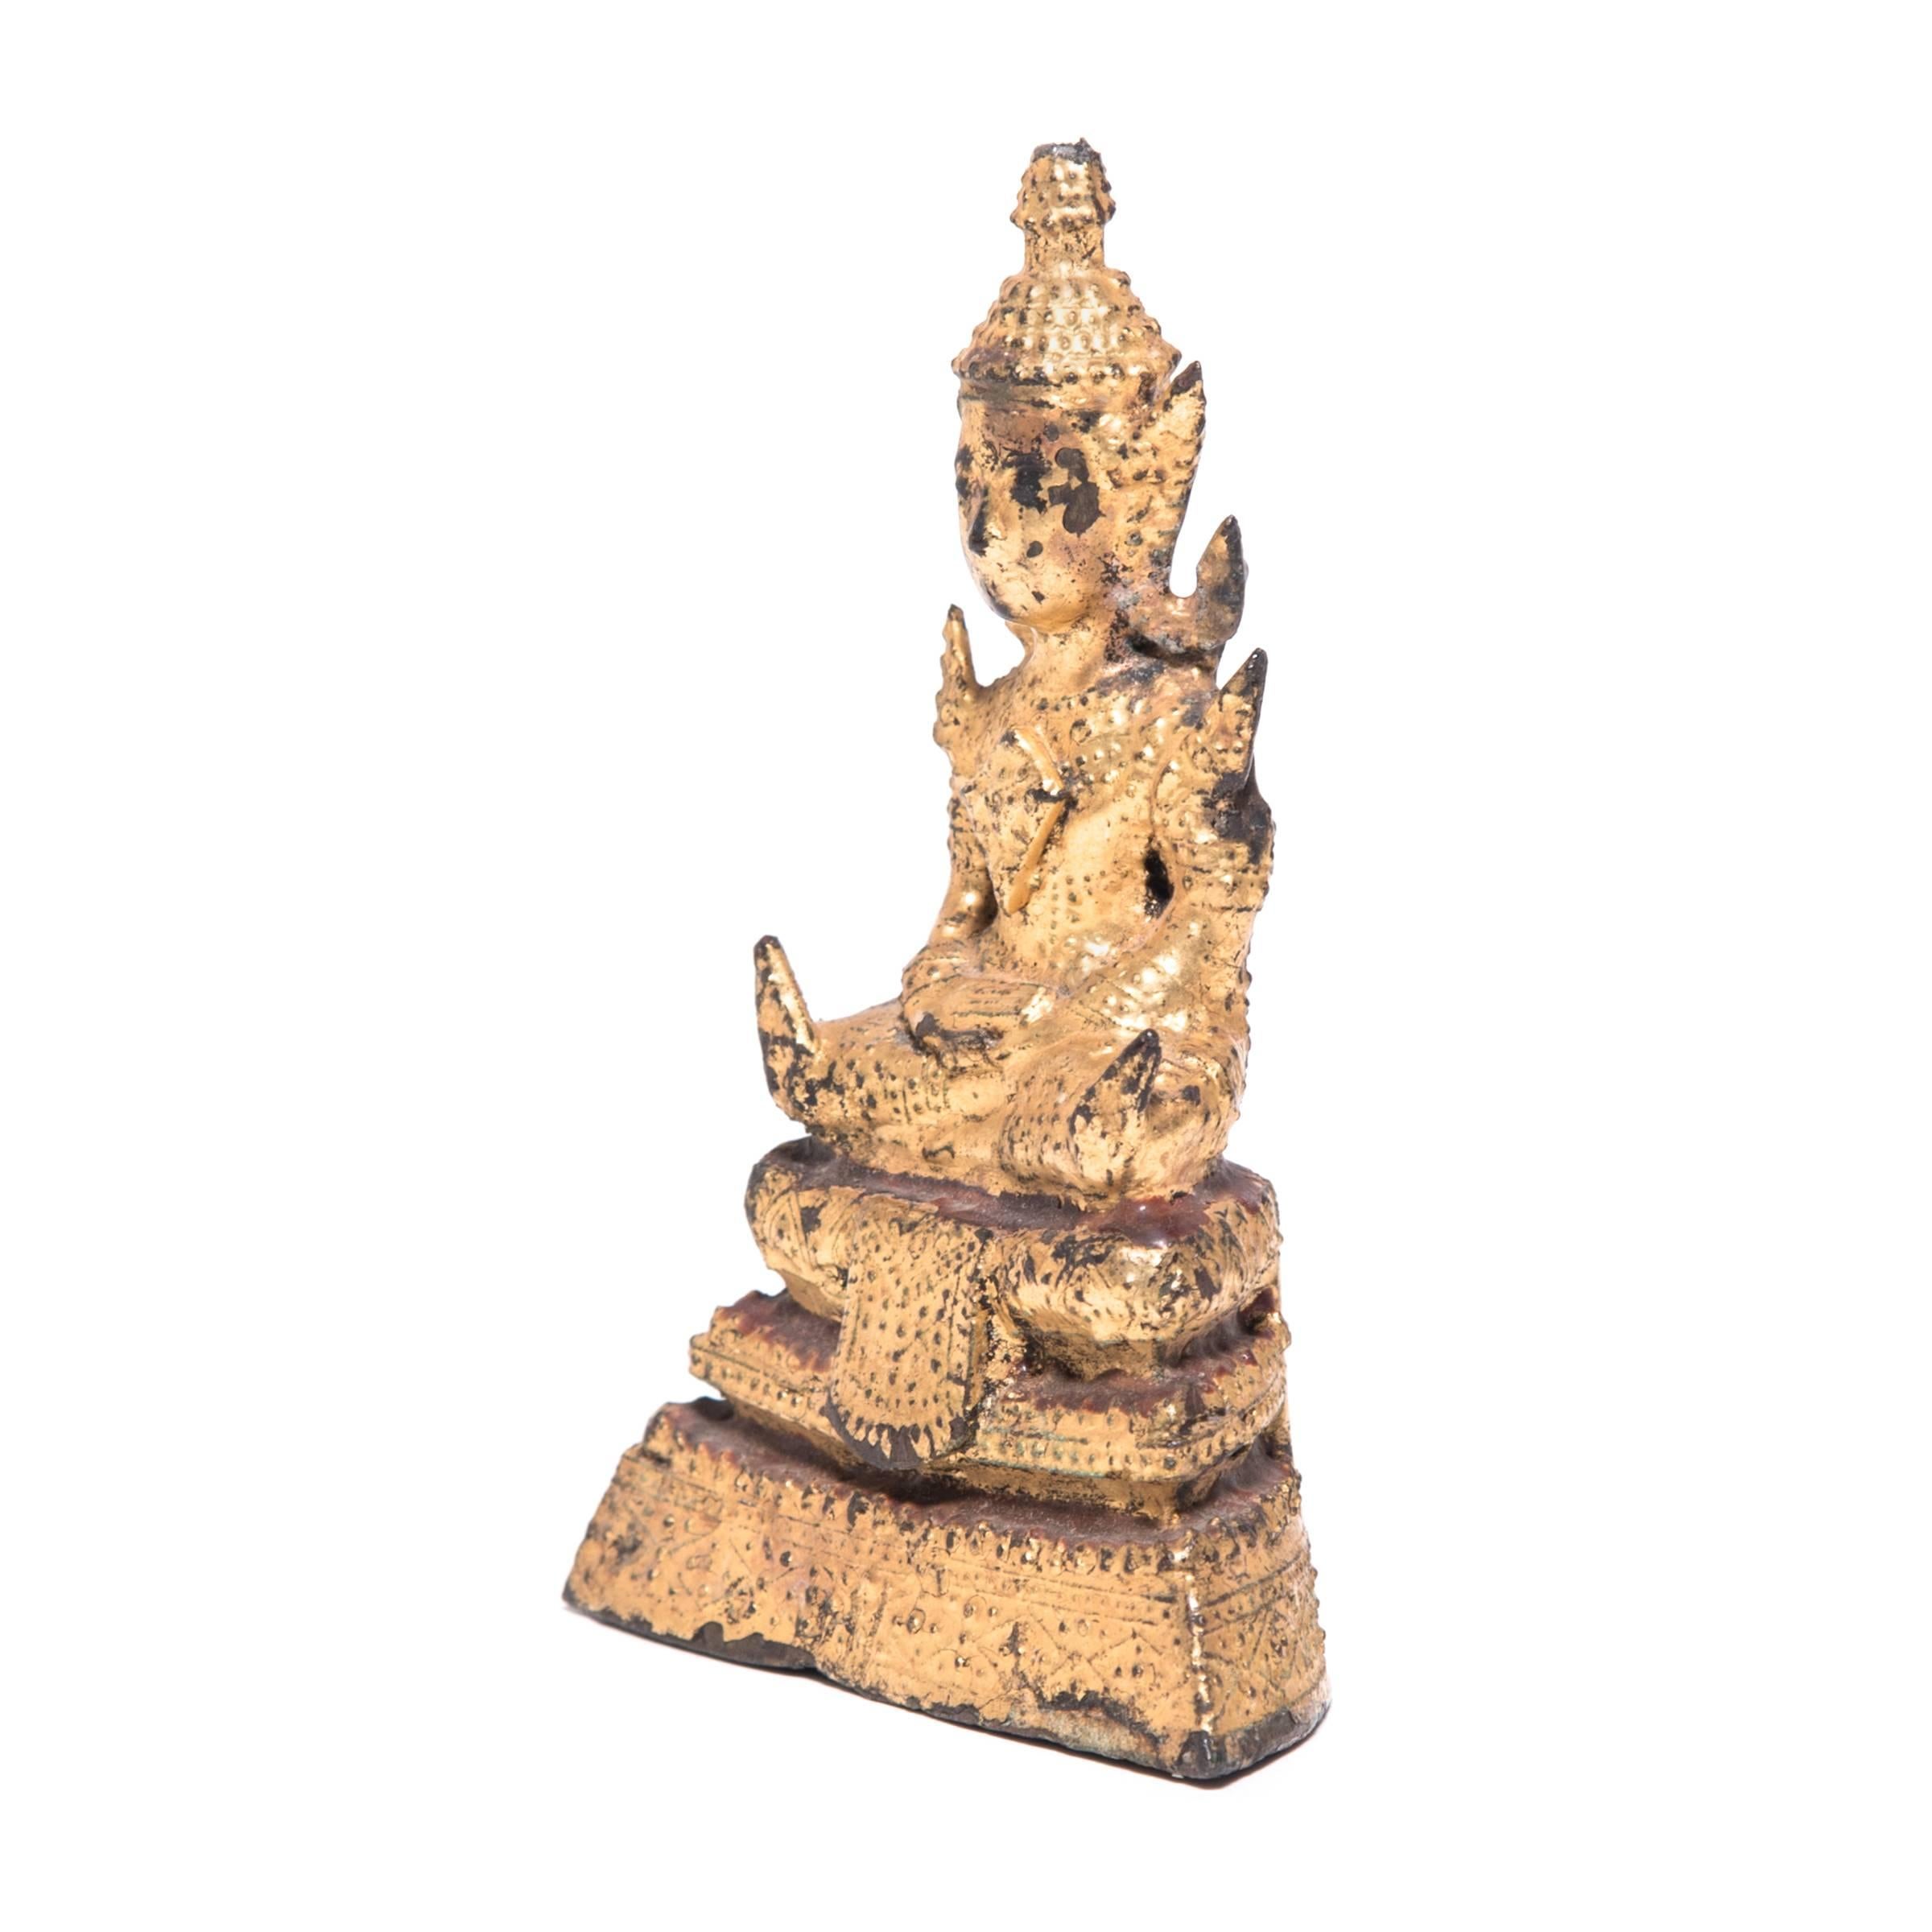 This petite Thai Buddha is a gallery favorite. With legs crossed and his hands in a meditative gesture known as a mudra, the Buddha is depicted in a transcendental state of meditation. Currently displayed inside a lovely rootform shrine, the eye